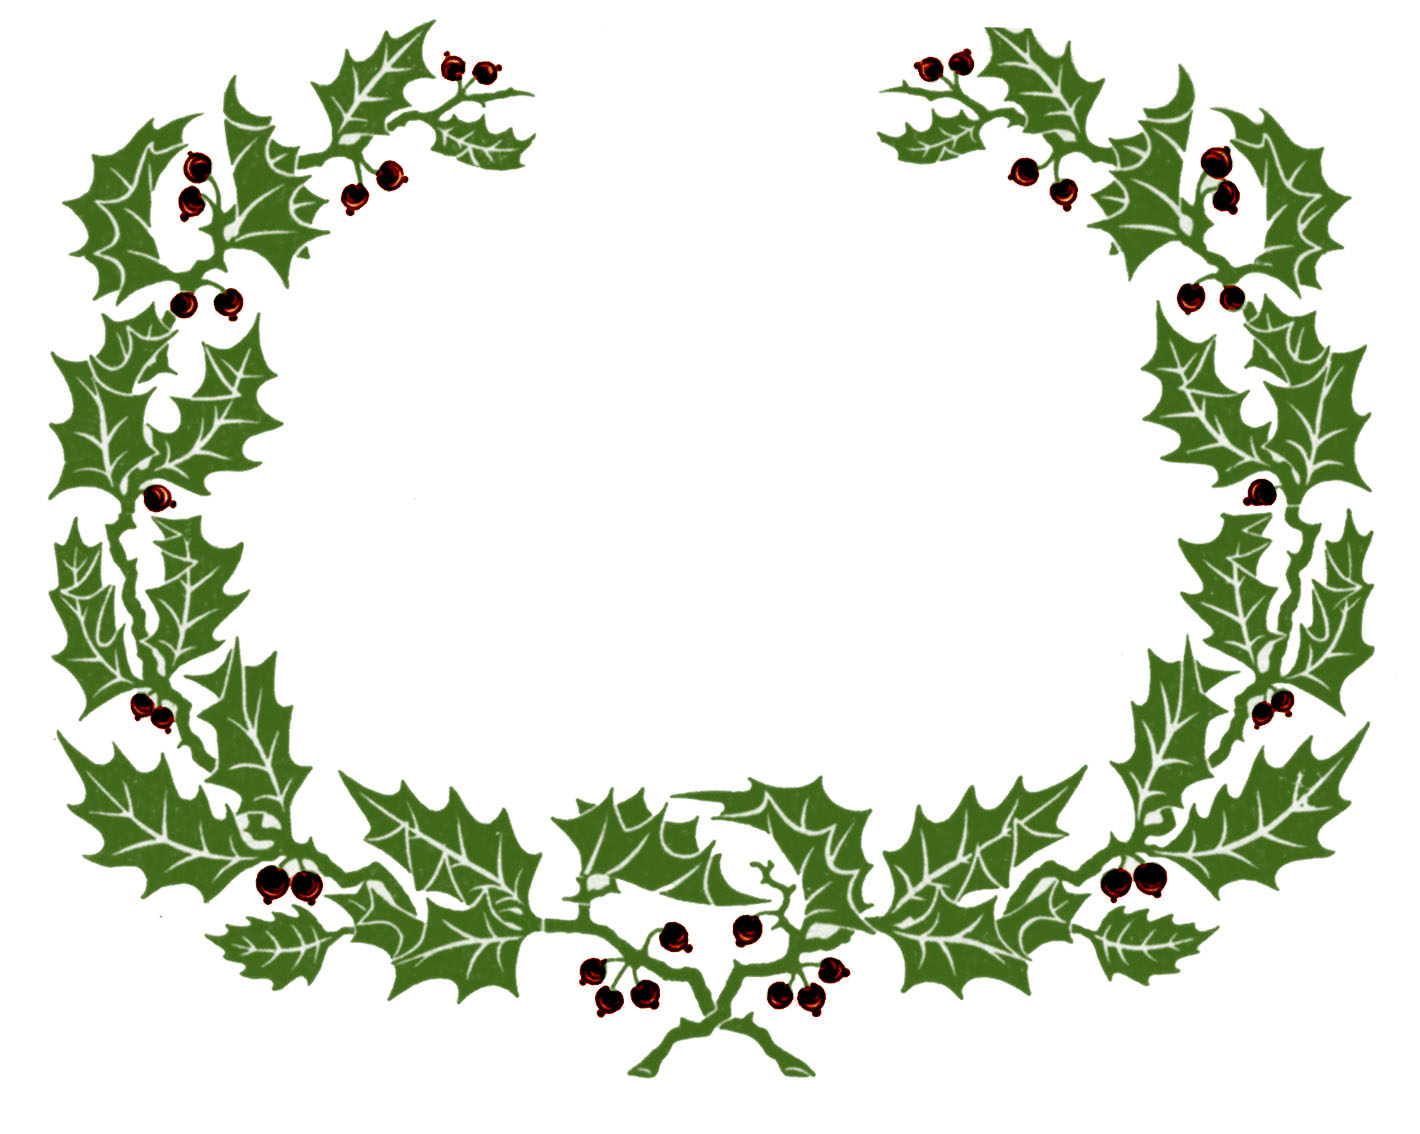 Vintage Holly Wreath Graphic Frame The Graphics Clipart